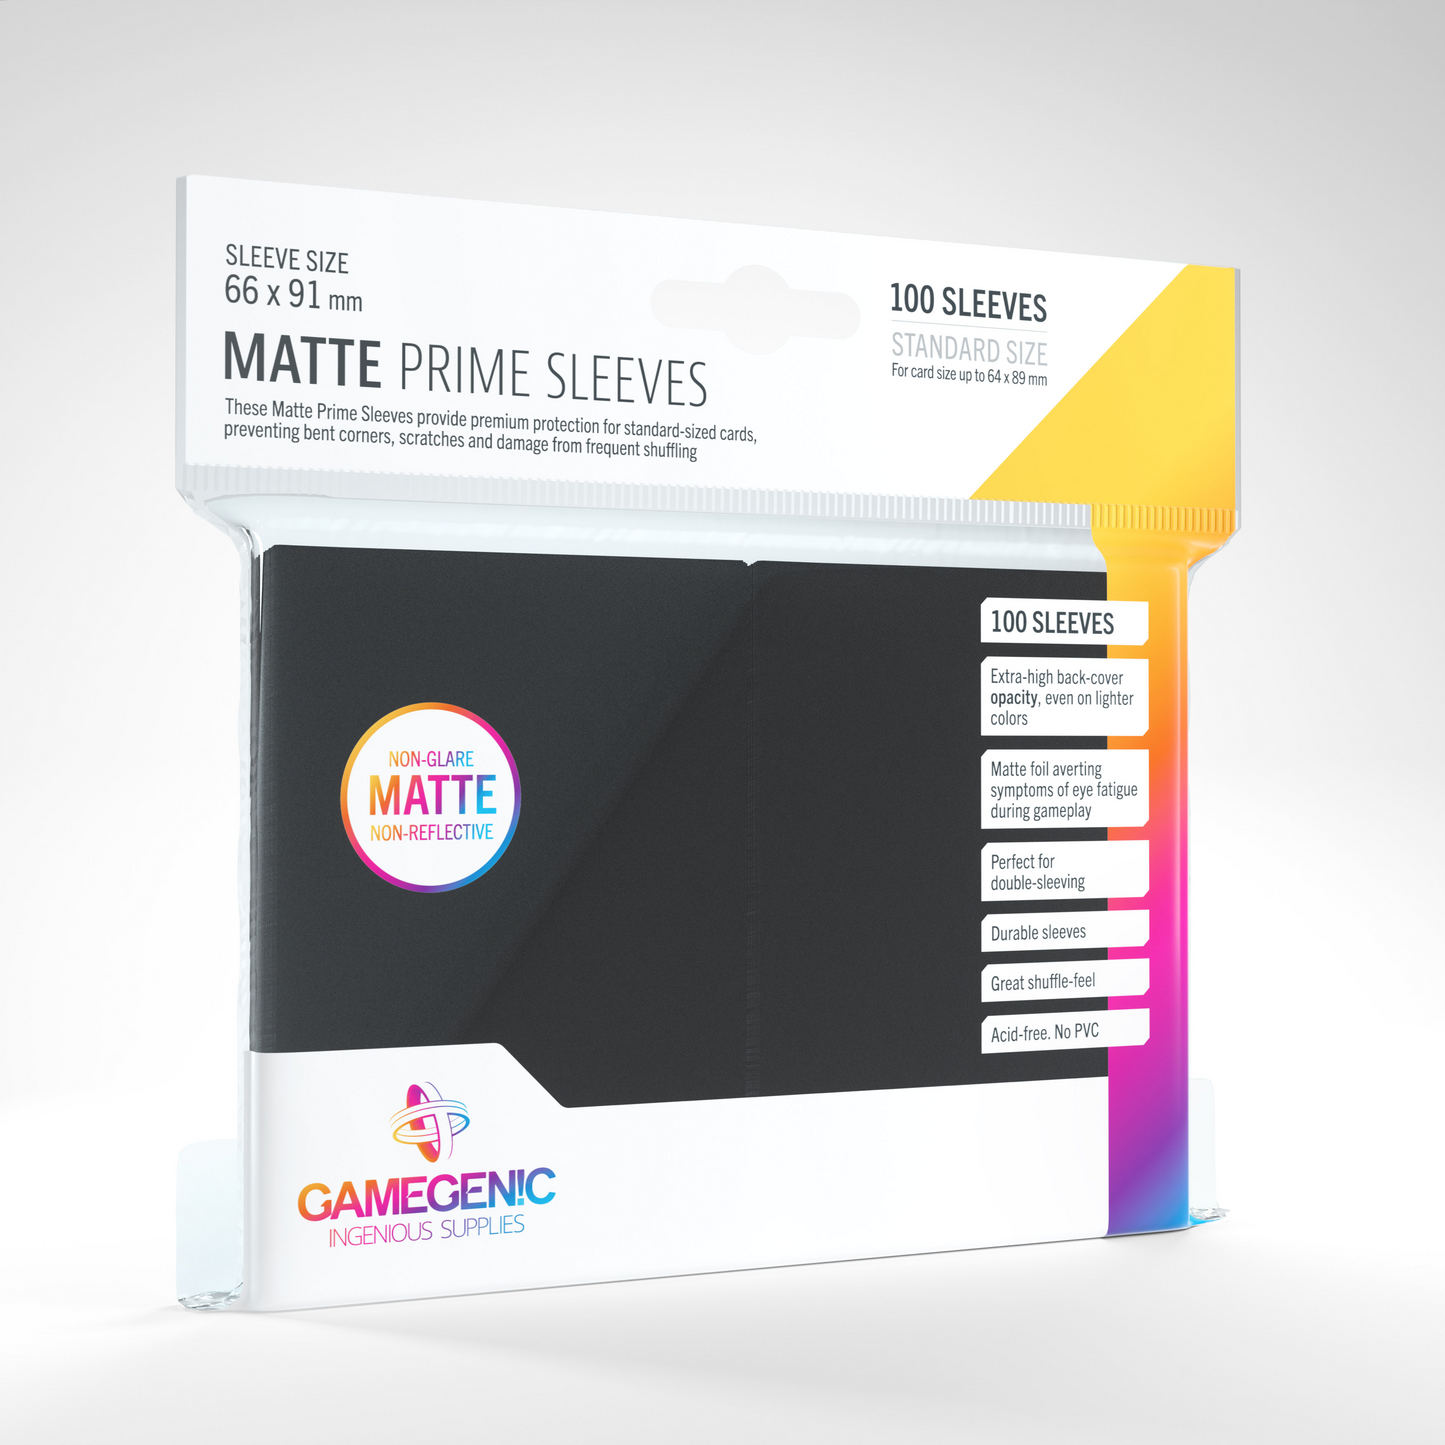 Gamegenic Matte Prime Sleeves - 100 ct.